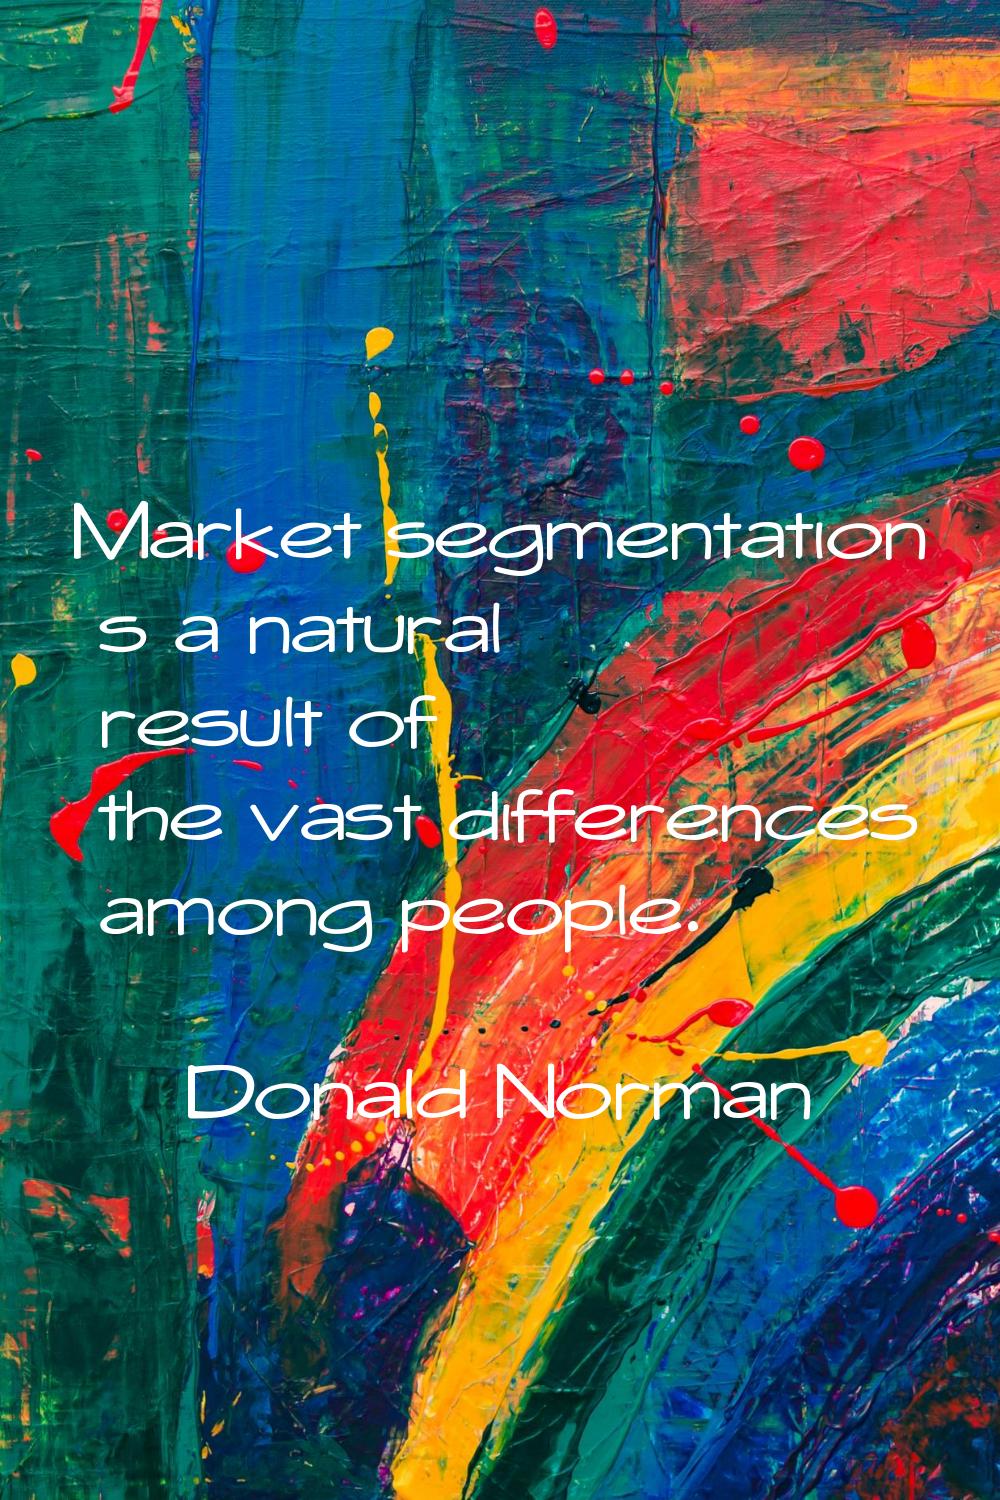 Market segmentation s a natural result of the vast differences among people.